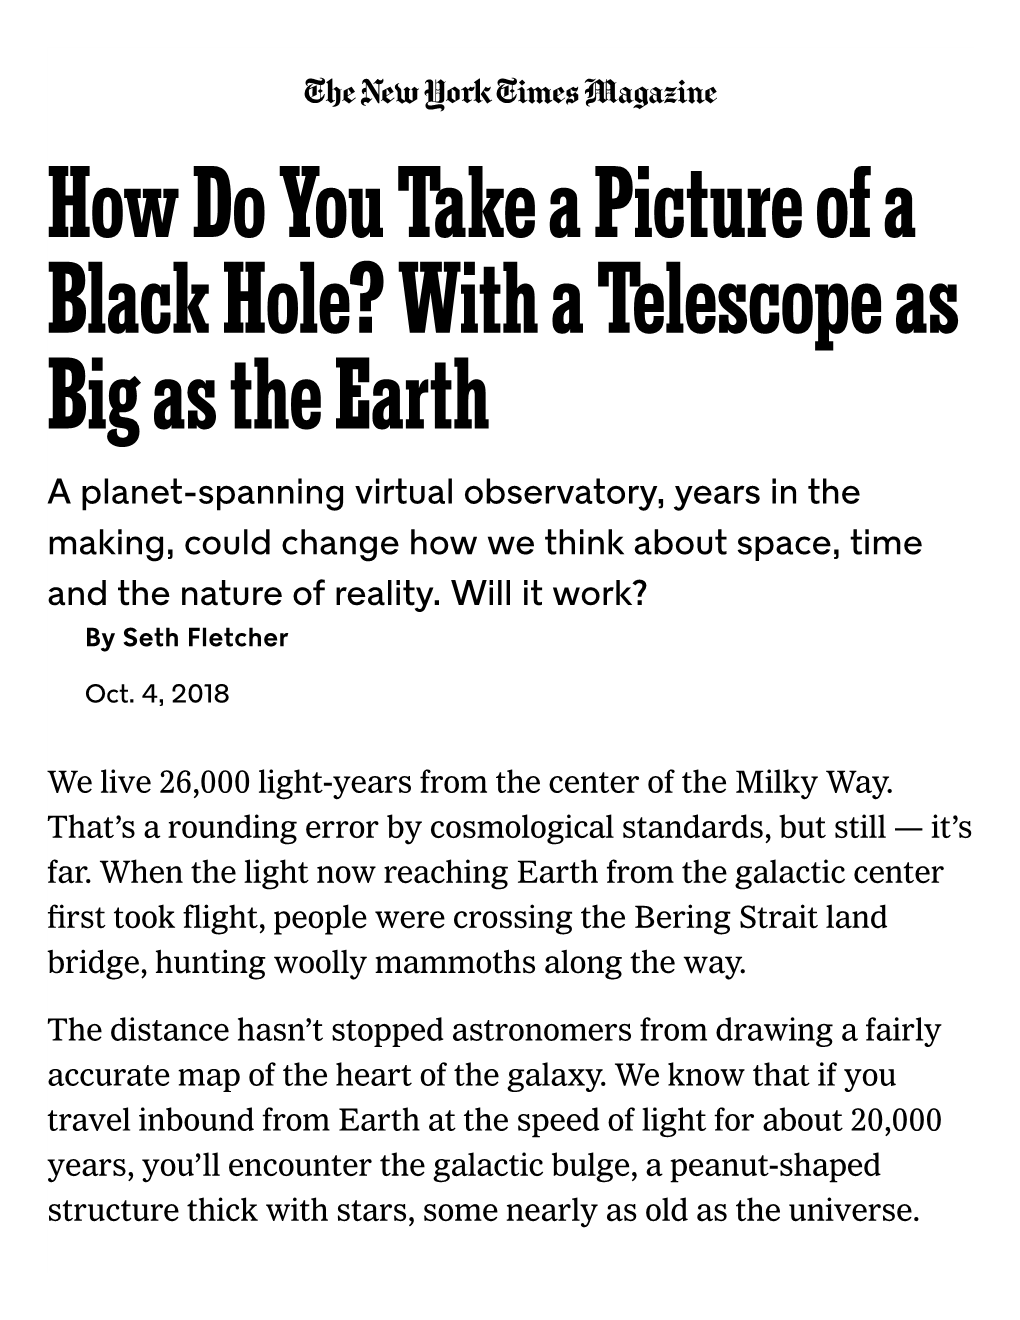 How Do You Take a Picture of a Black Hole? with a Telescope As Big As the Earth